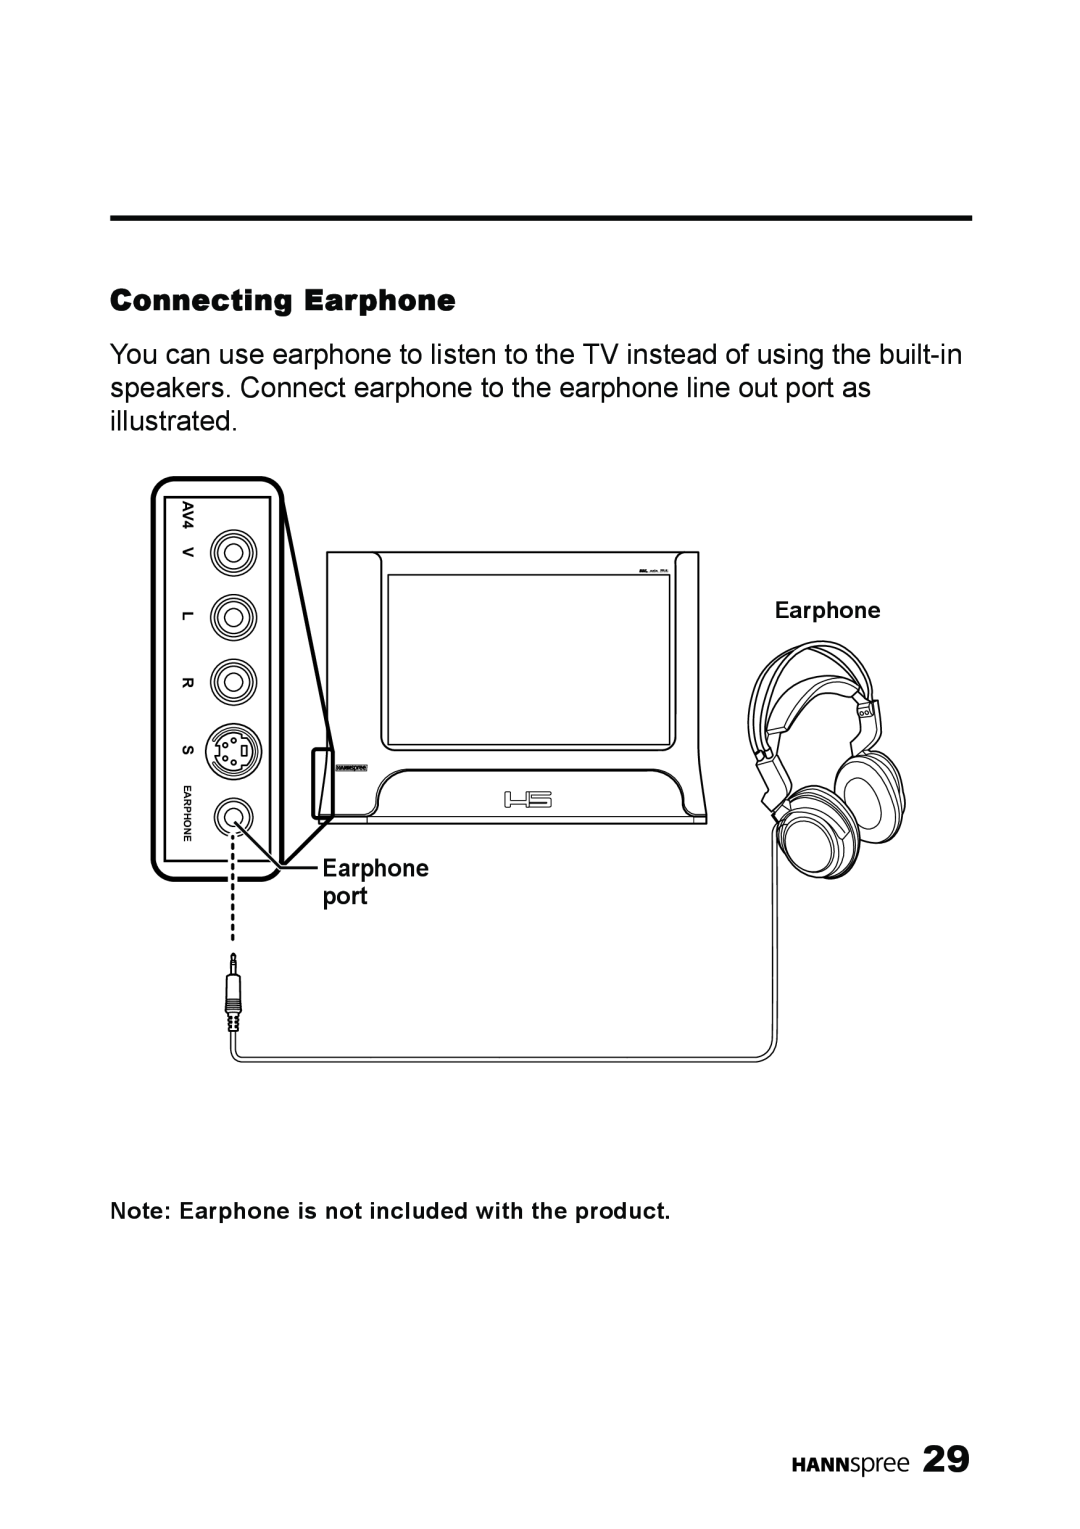 HANNspree LT11-23A1 user manual Connecting Earphone, Earphone port, Note Earphone is not included with the product 